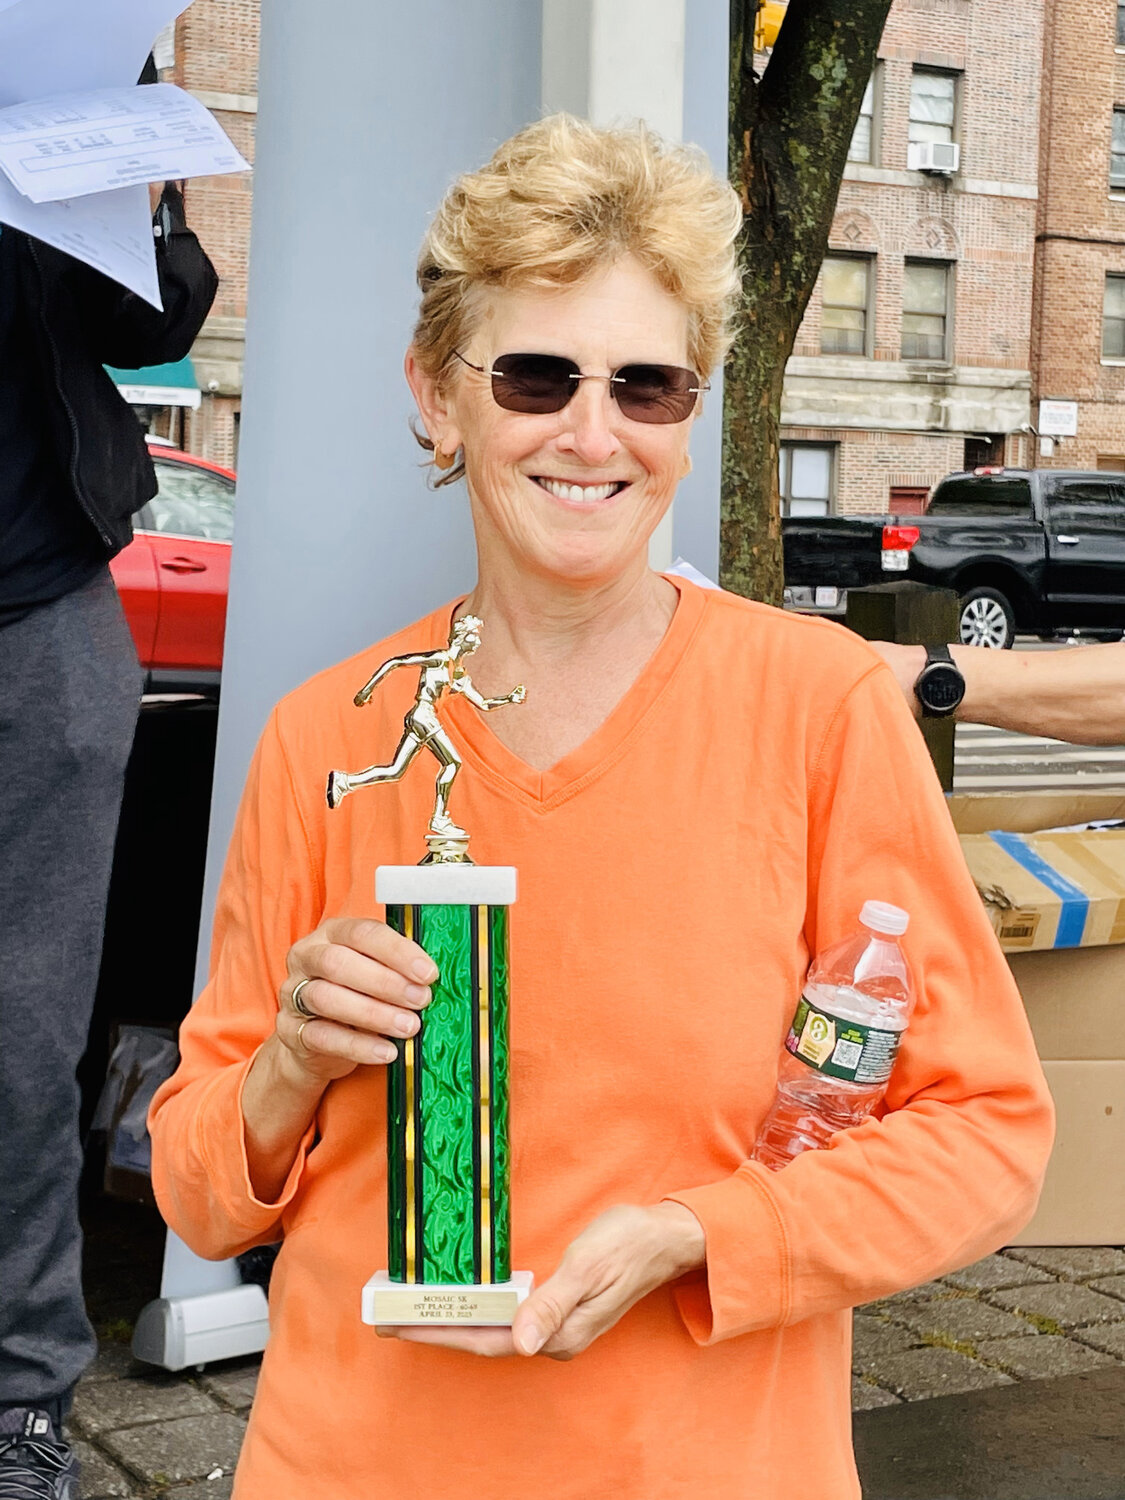 Kathleen Nolan, 66, of the Bronx was the champion in the 60-69-year-old women's division with a time of 33:29.2.